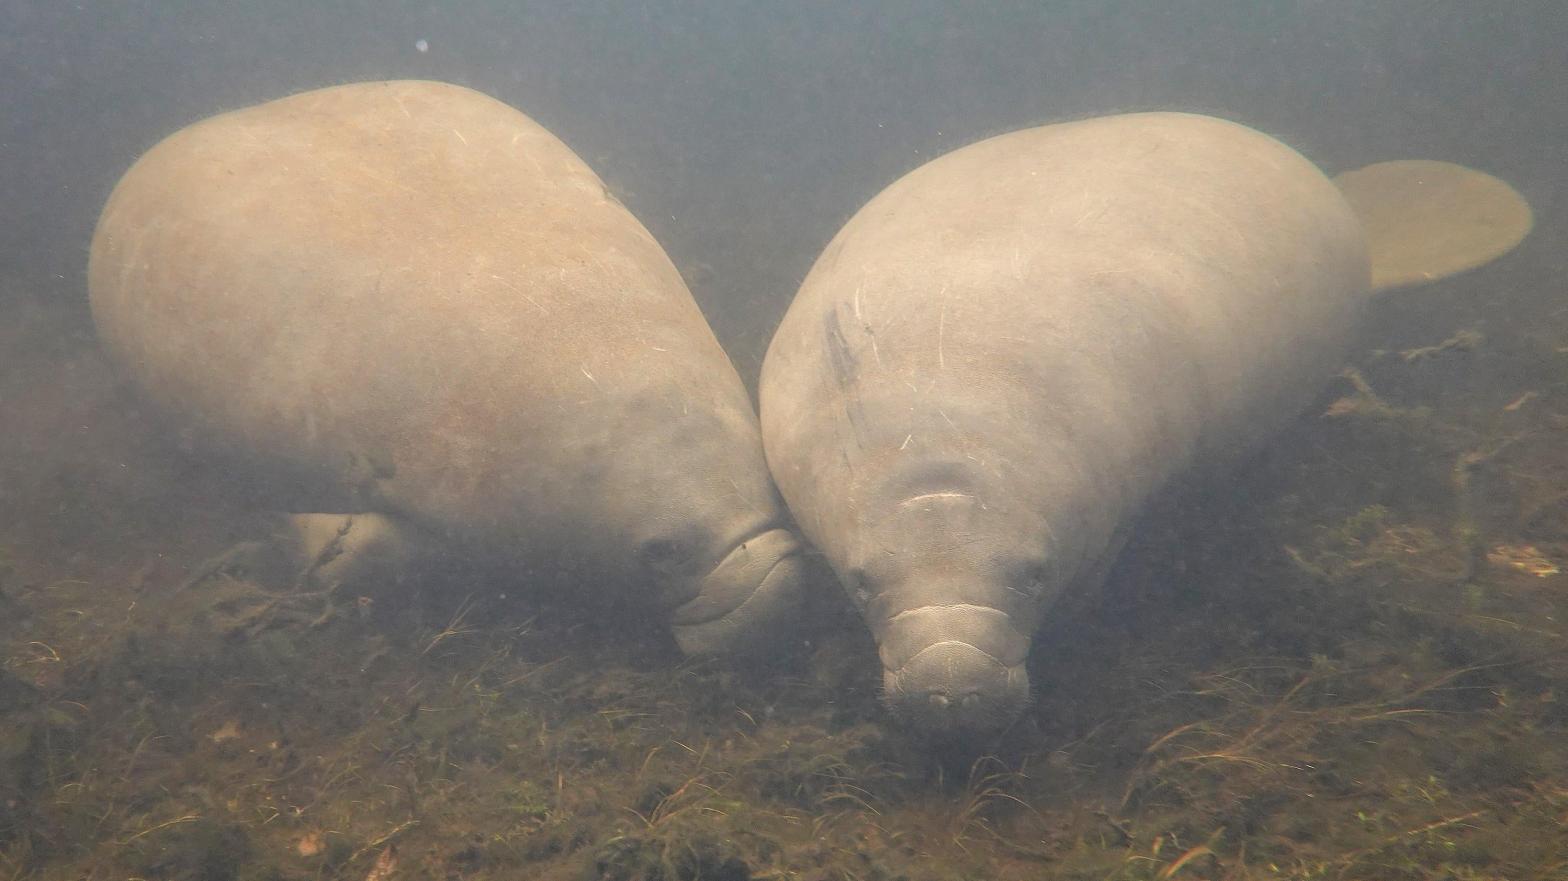 Manatees in the Homosassa River in Florida where conservationists planted seagrass to help restore their natural habitat. Manatees had been listed as endangered until 2017 thanks to preservation efforts. (Photo: Joe Raedle, Getty Images)